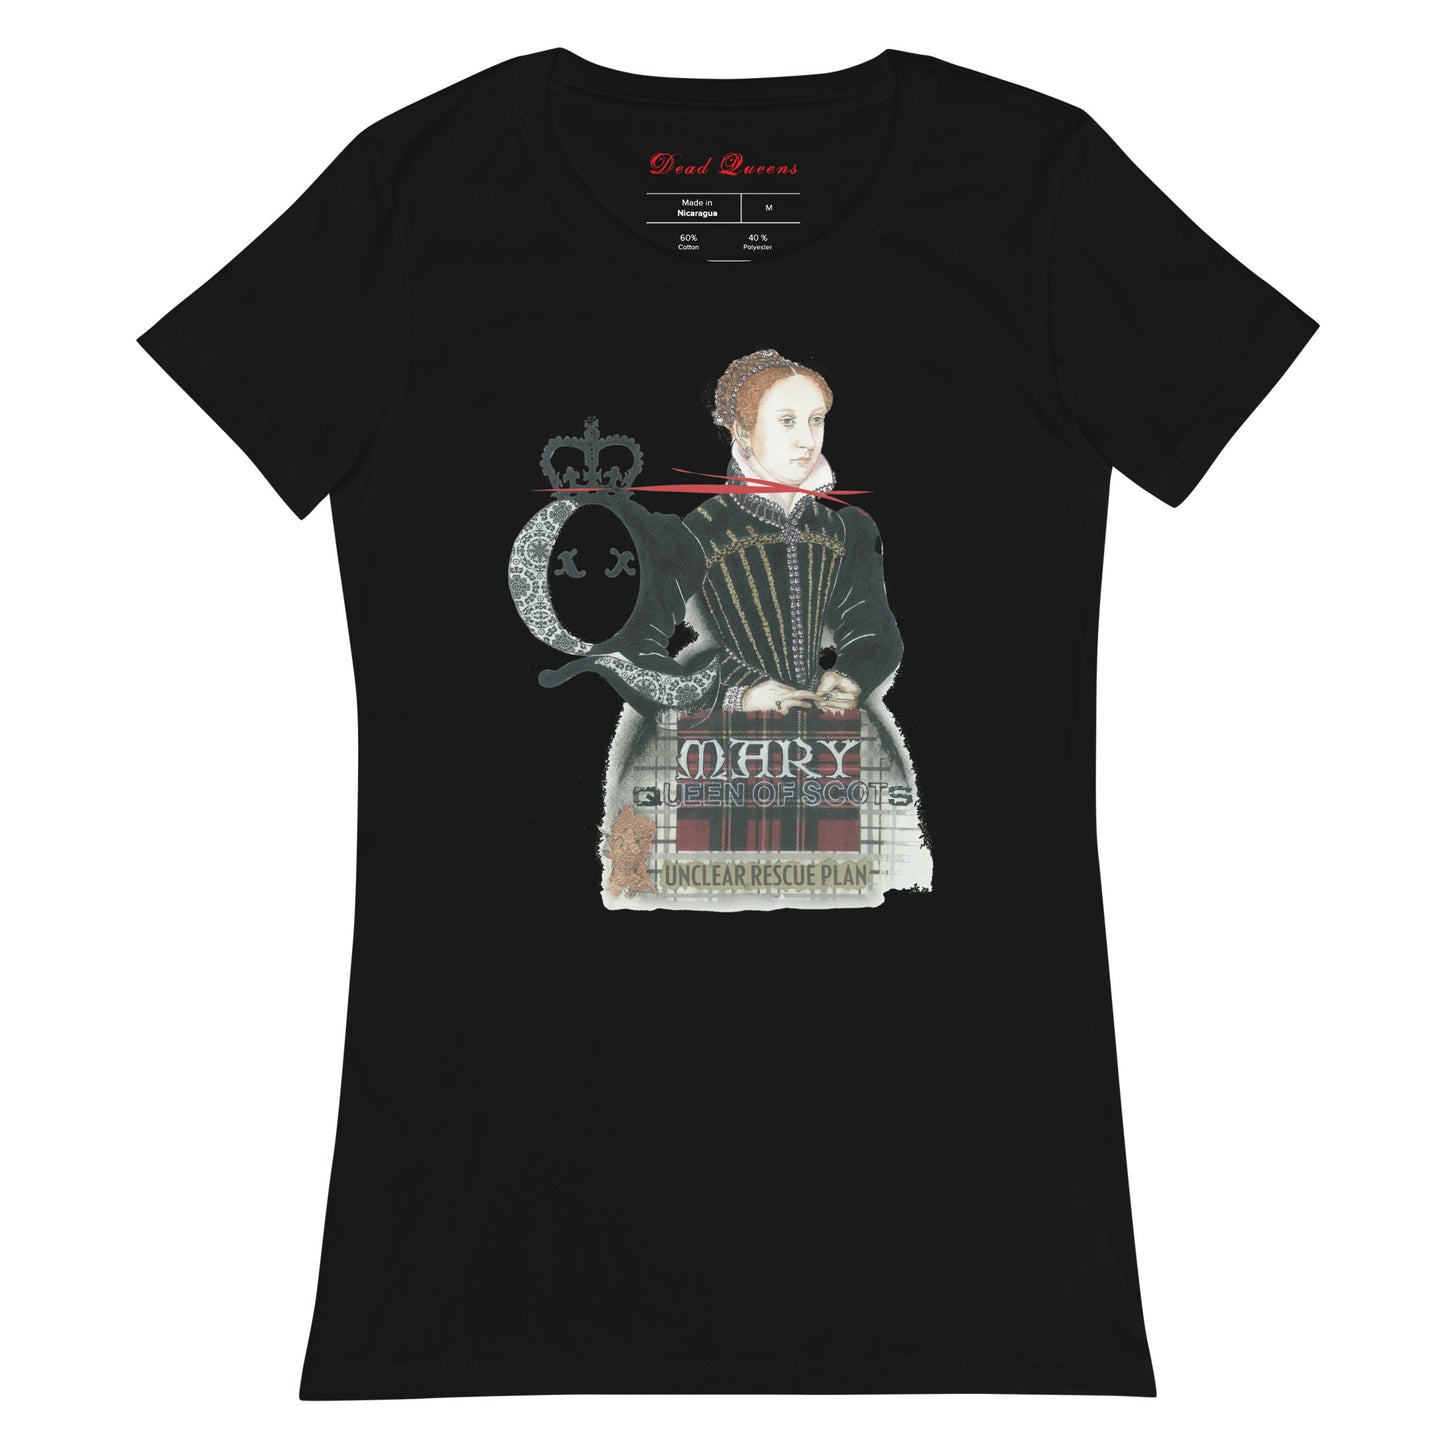 Mary Queen of Scots T-Shirt-Black